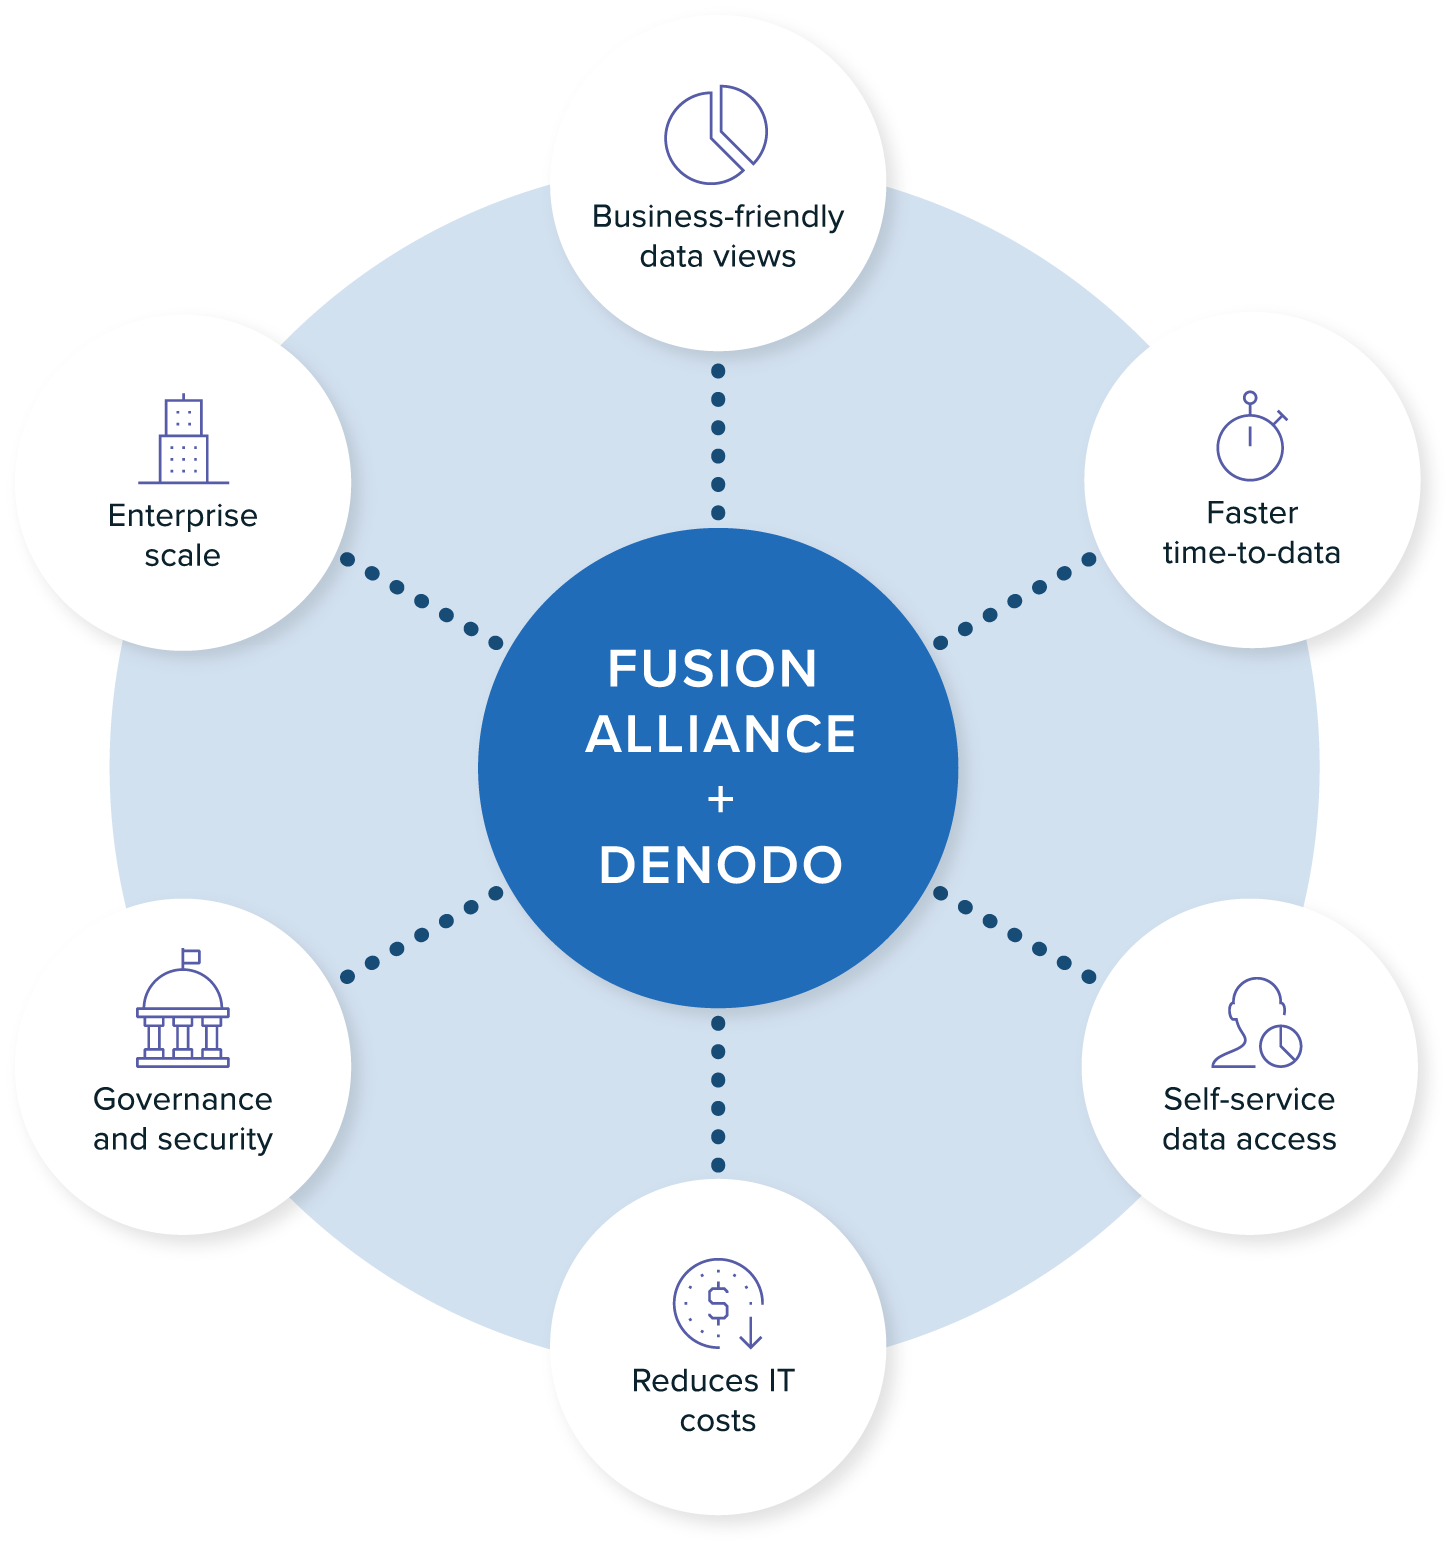 Fusion Alliance and Denodo can deliver value to both the business and IT in many ways